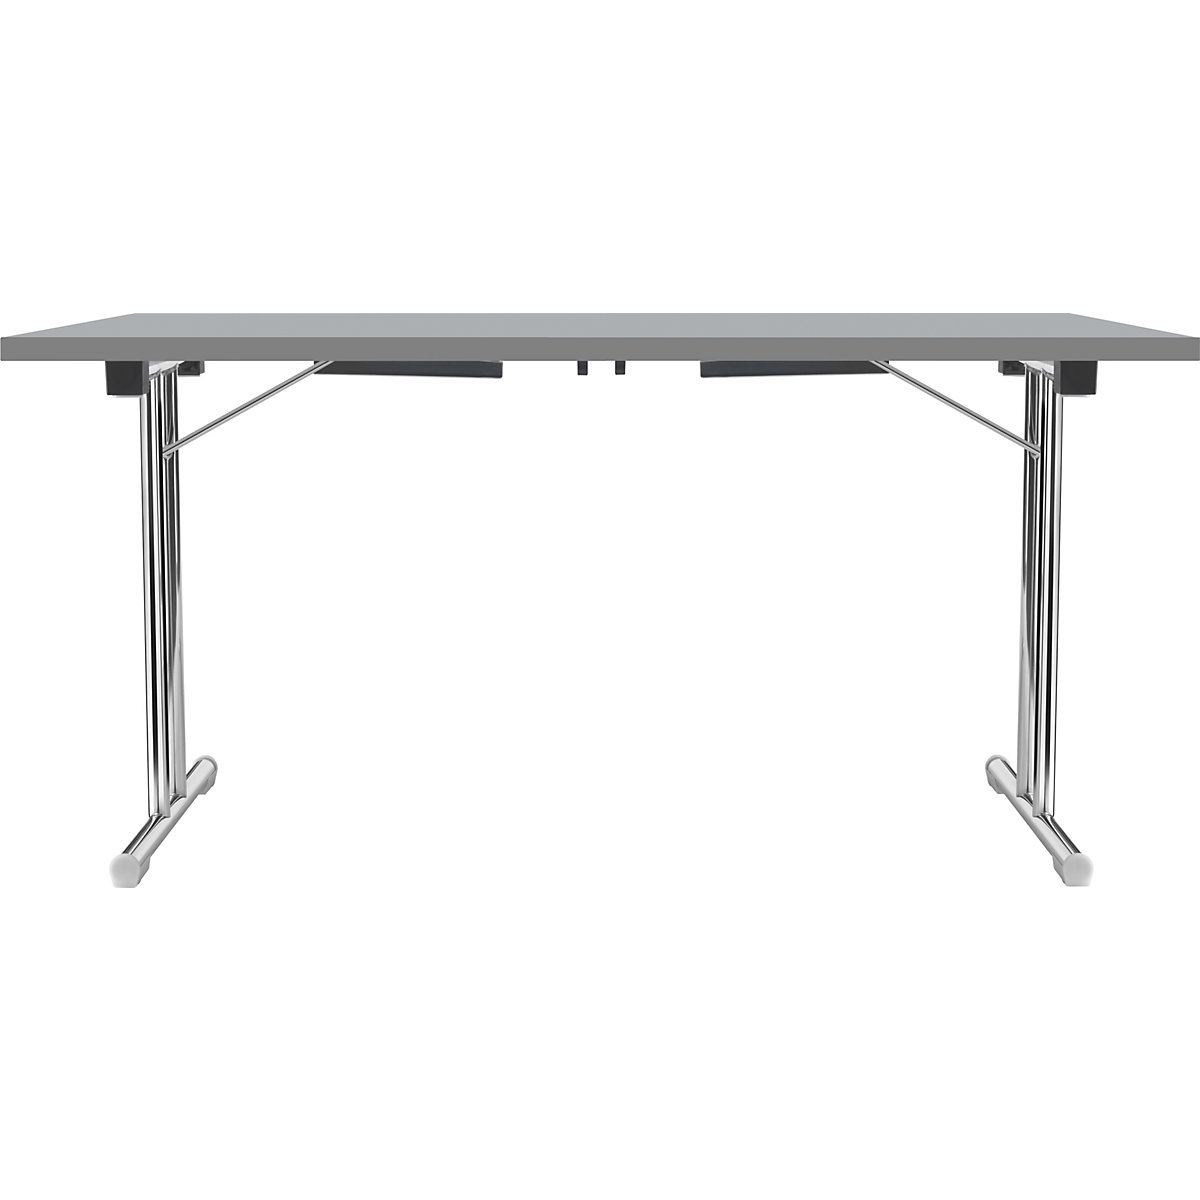 Folding table with double T base, tubular steel frame, chrome plated, light grey/charcoal, WxD 1200 x 600 mm-17